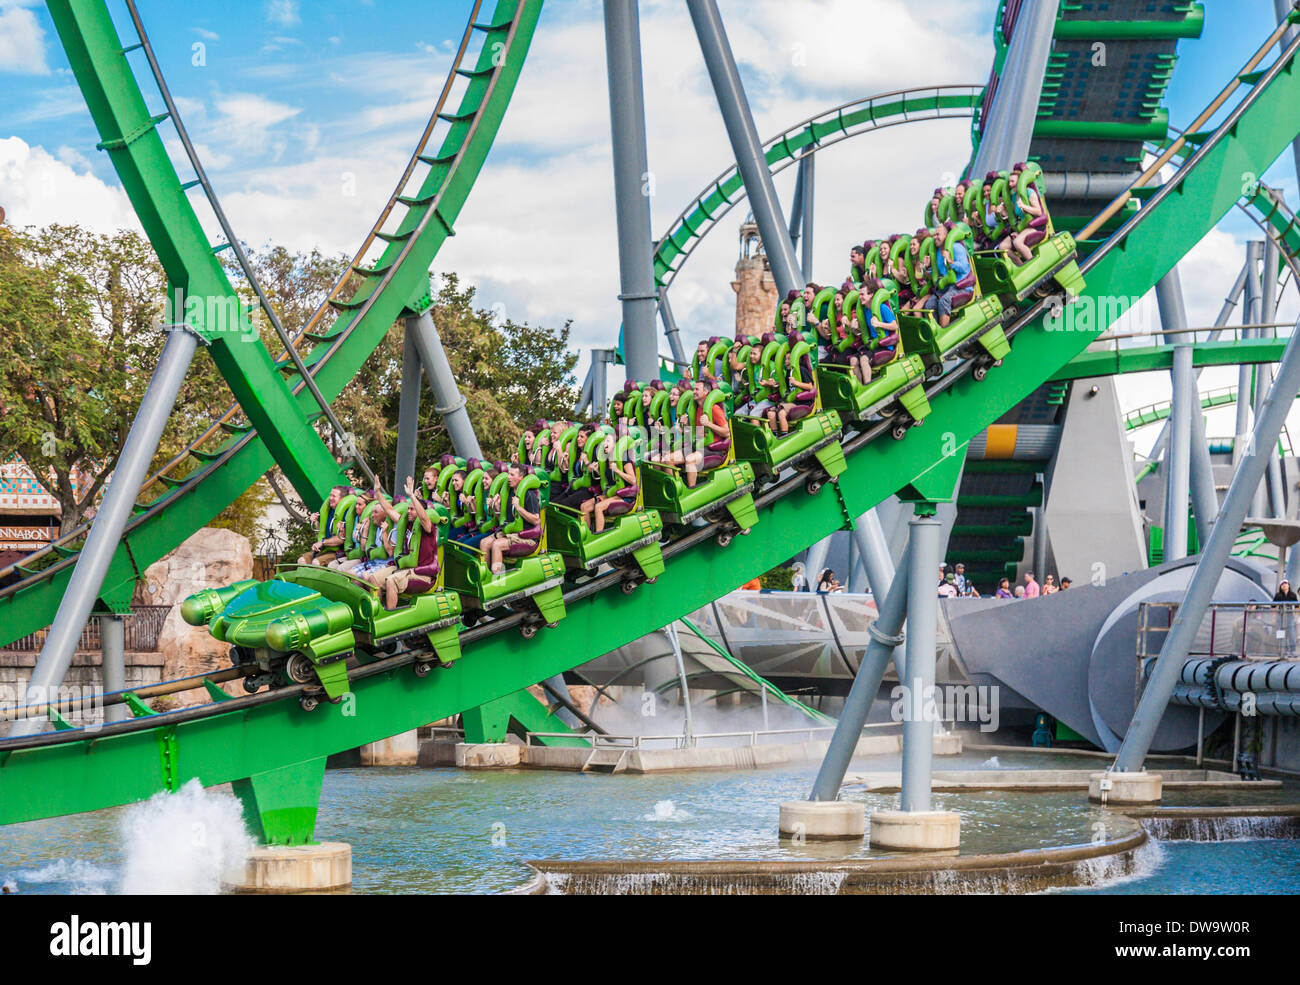 park-guest-riding-the-incredible-hulk-roller-coaster-in-marvel-super-DW9W0R.jpg